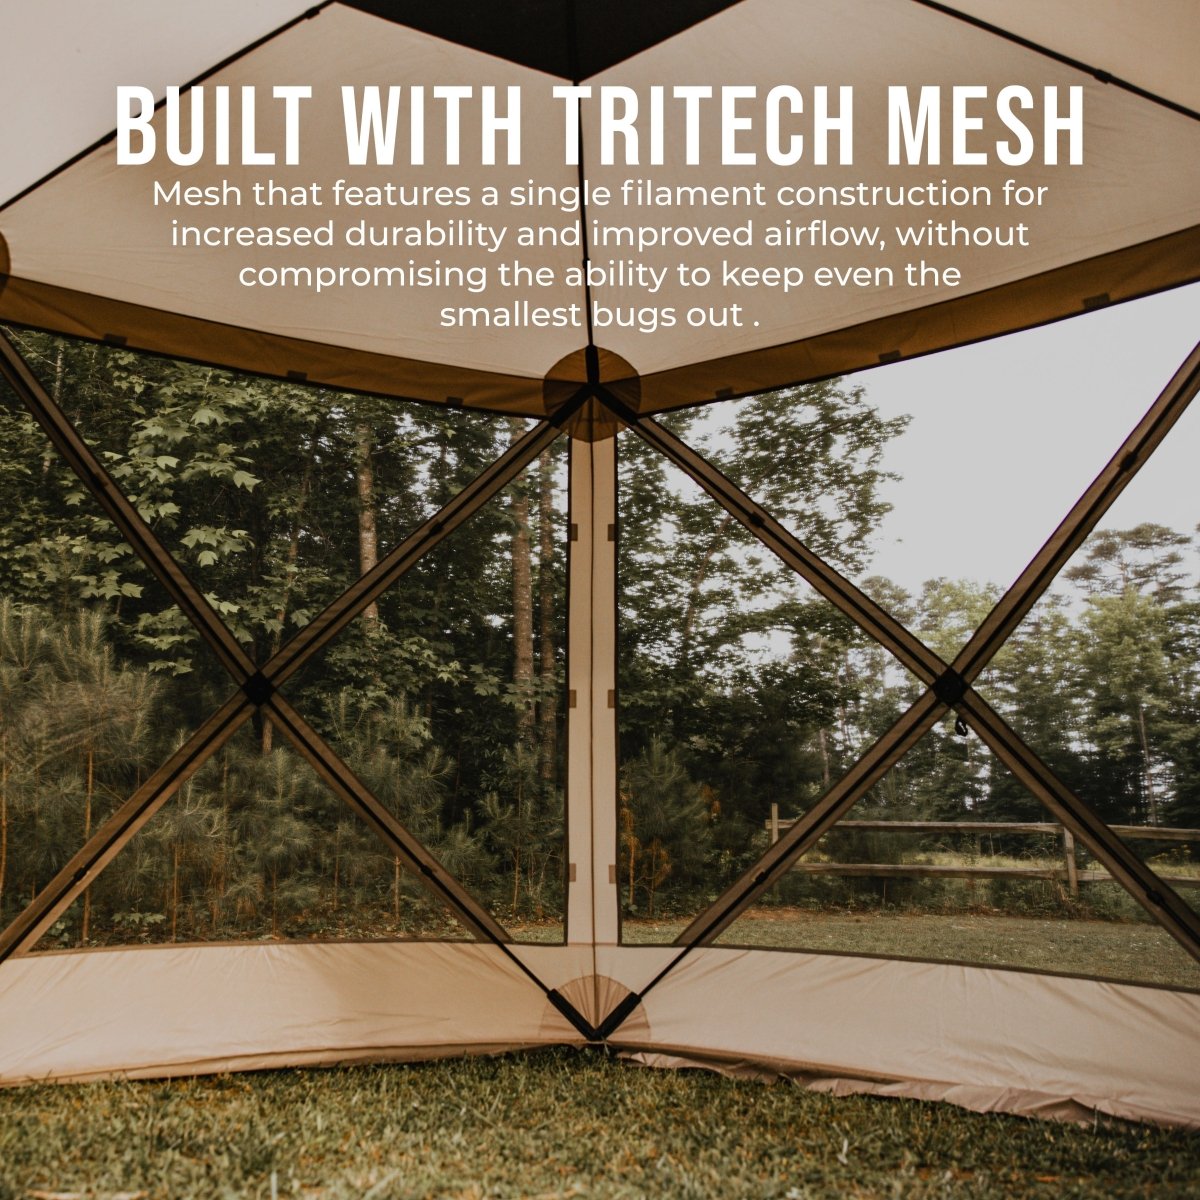 G5 5-Sided Portable Gazebo with TriTech Mesh - Overland Bound